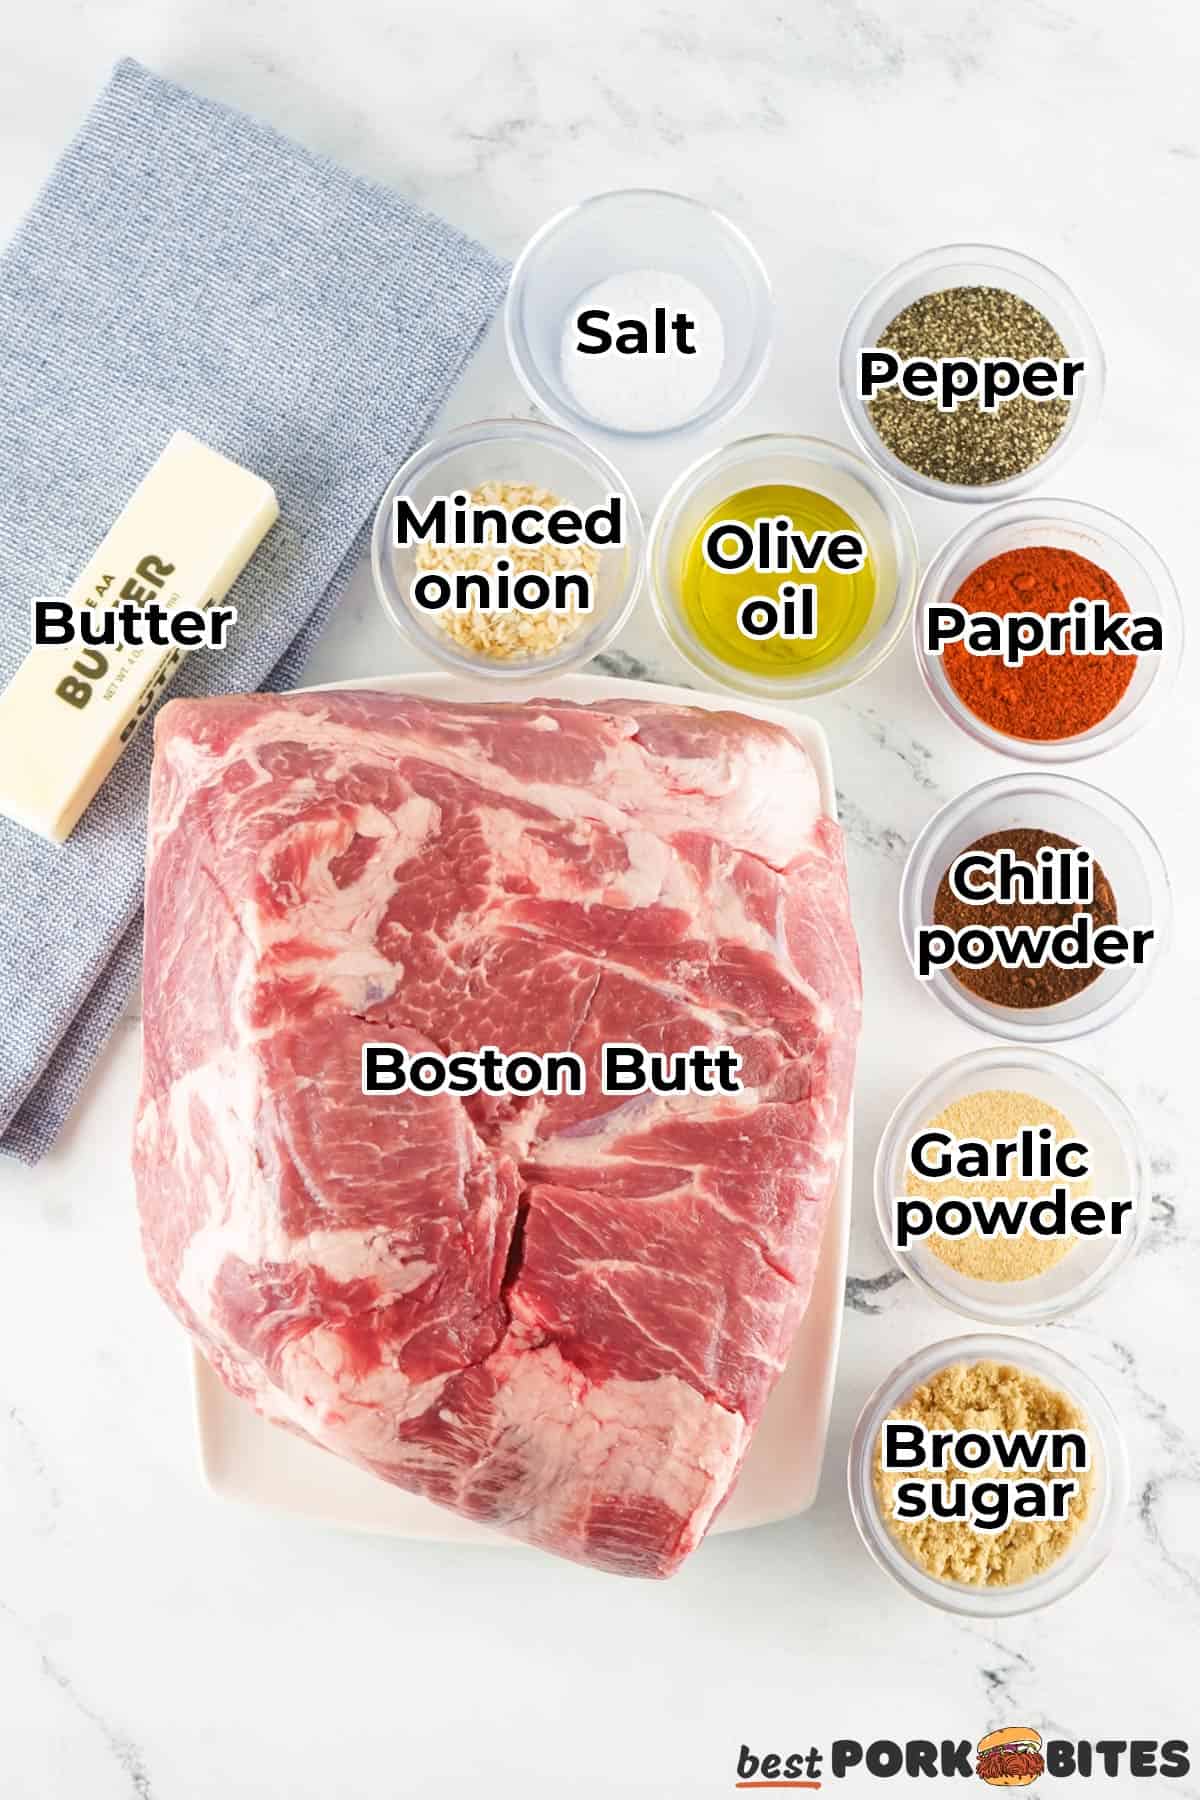 all the ingredients for smoked boston butt in separate bowls with labels